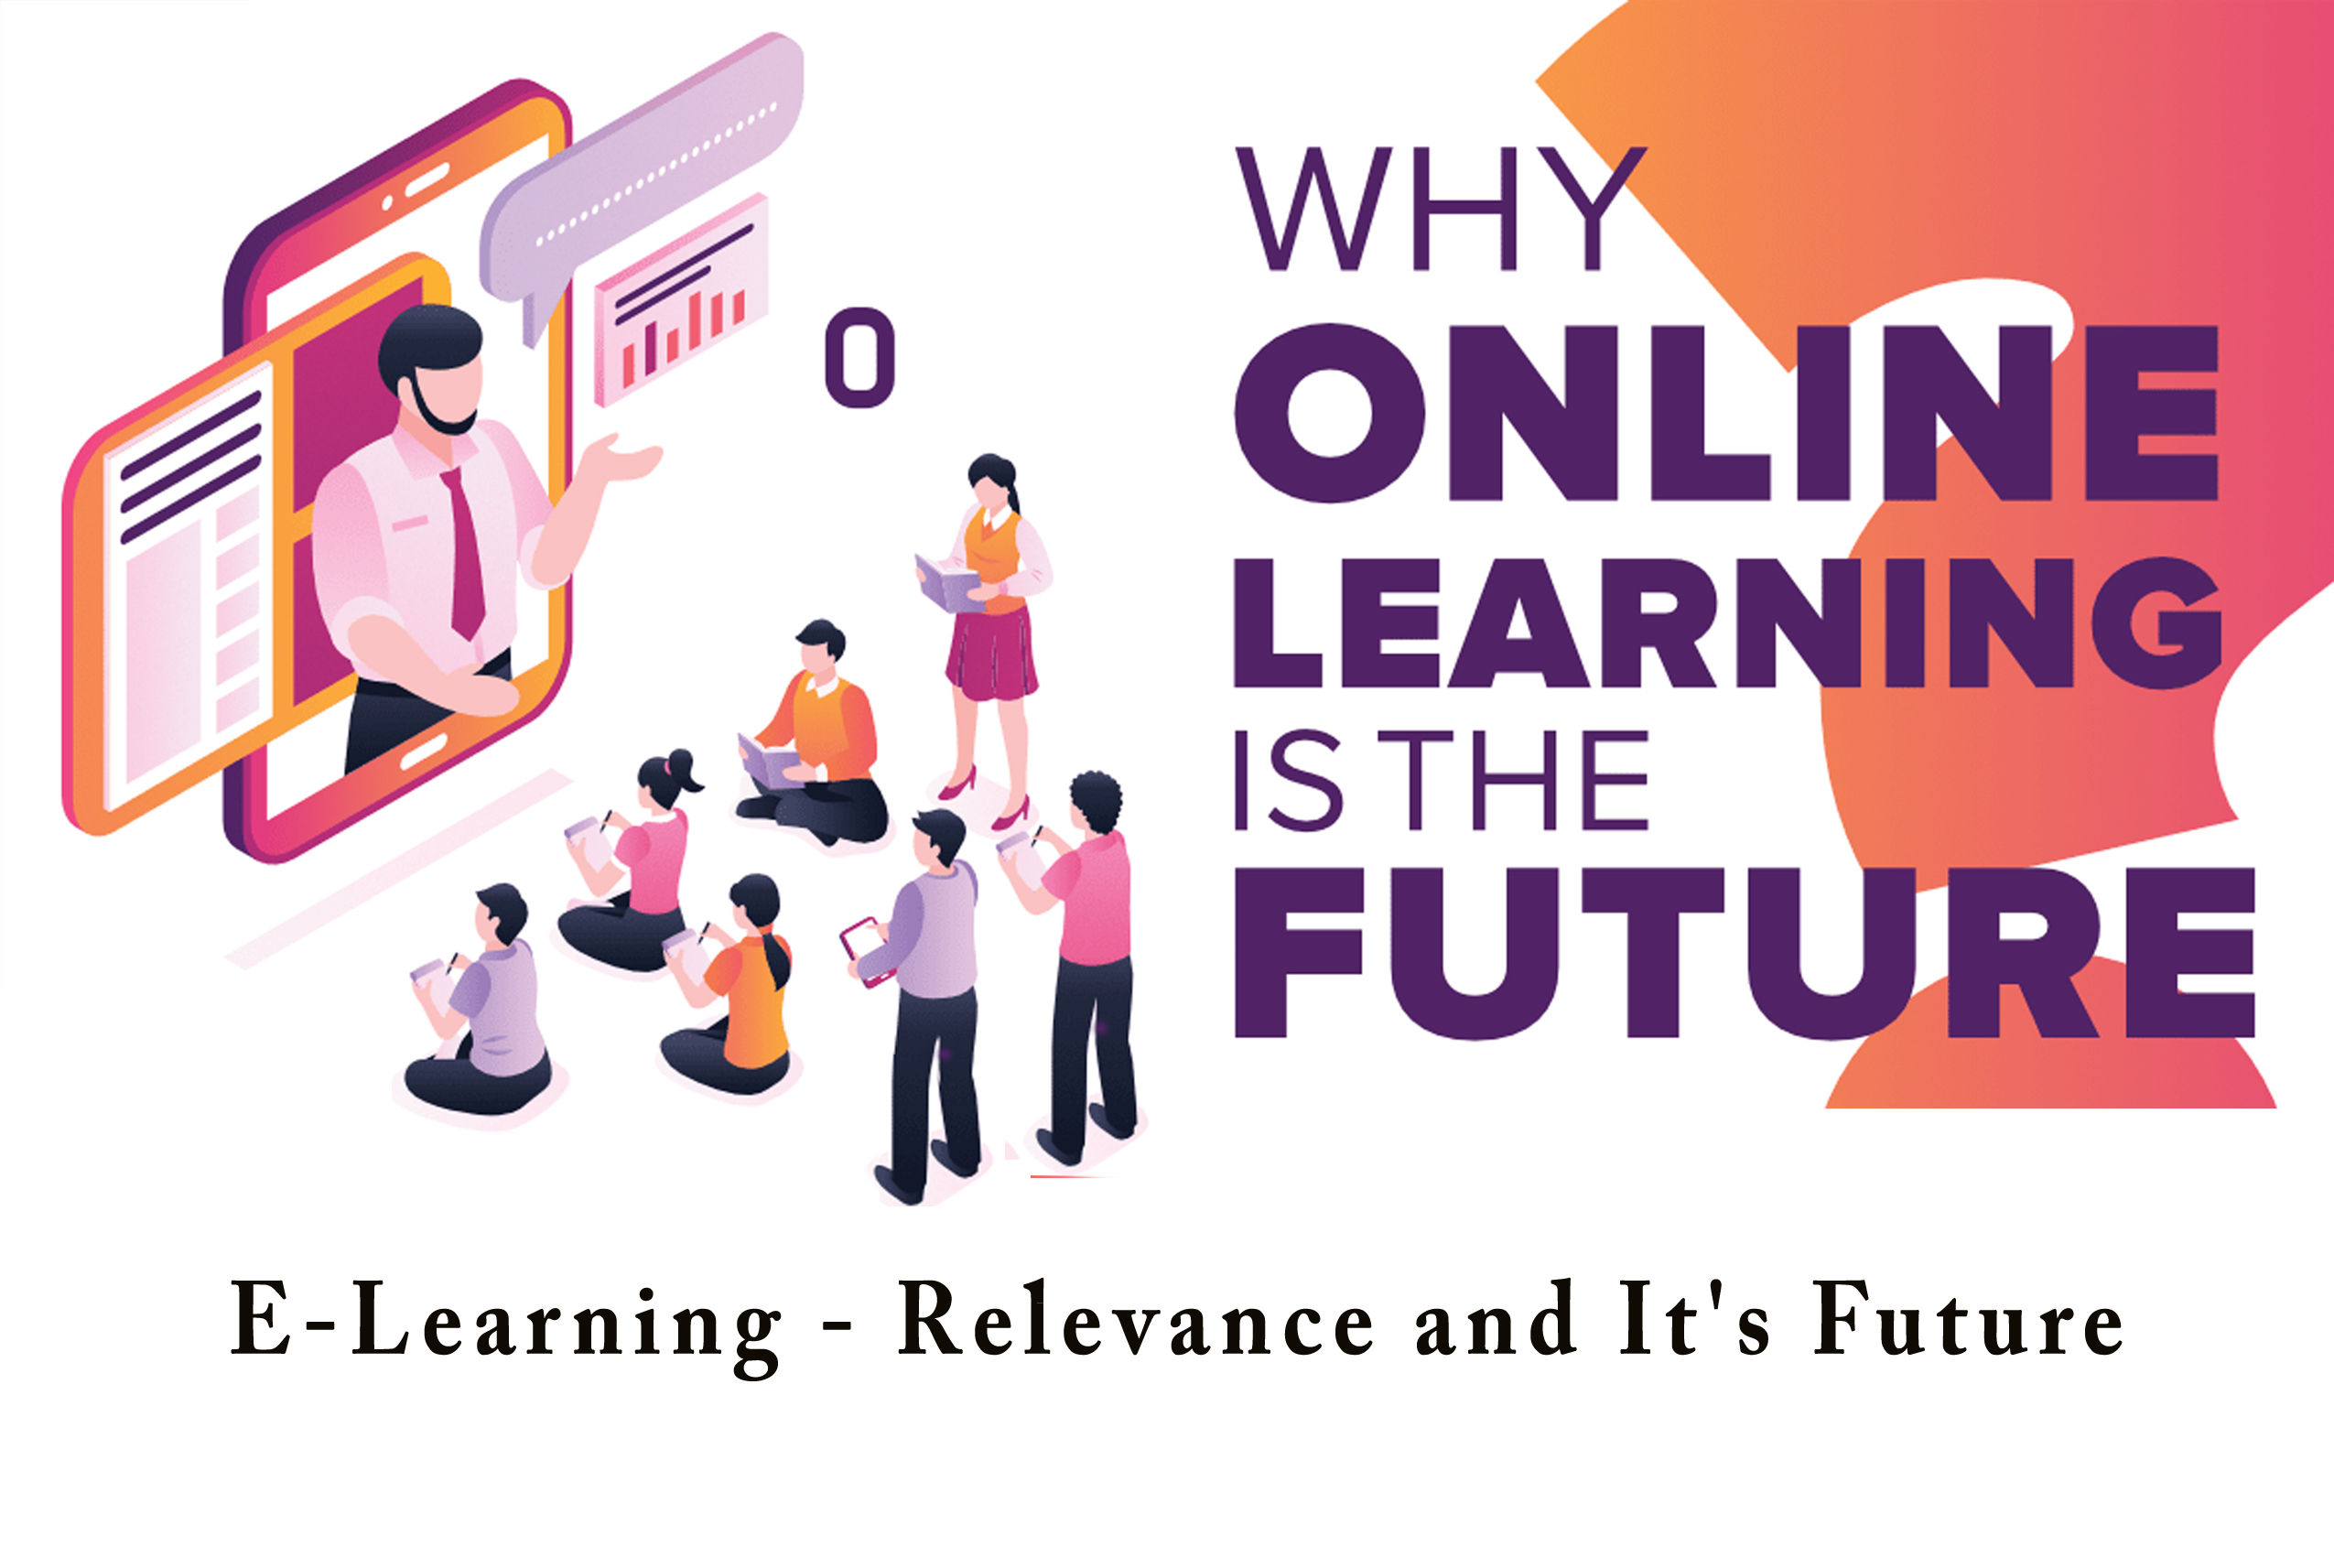 E-Learning - Relevance and It's Future